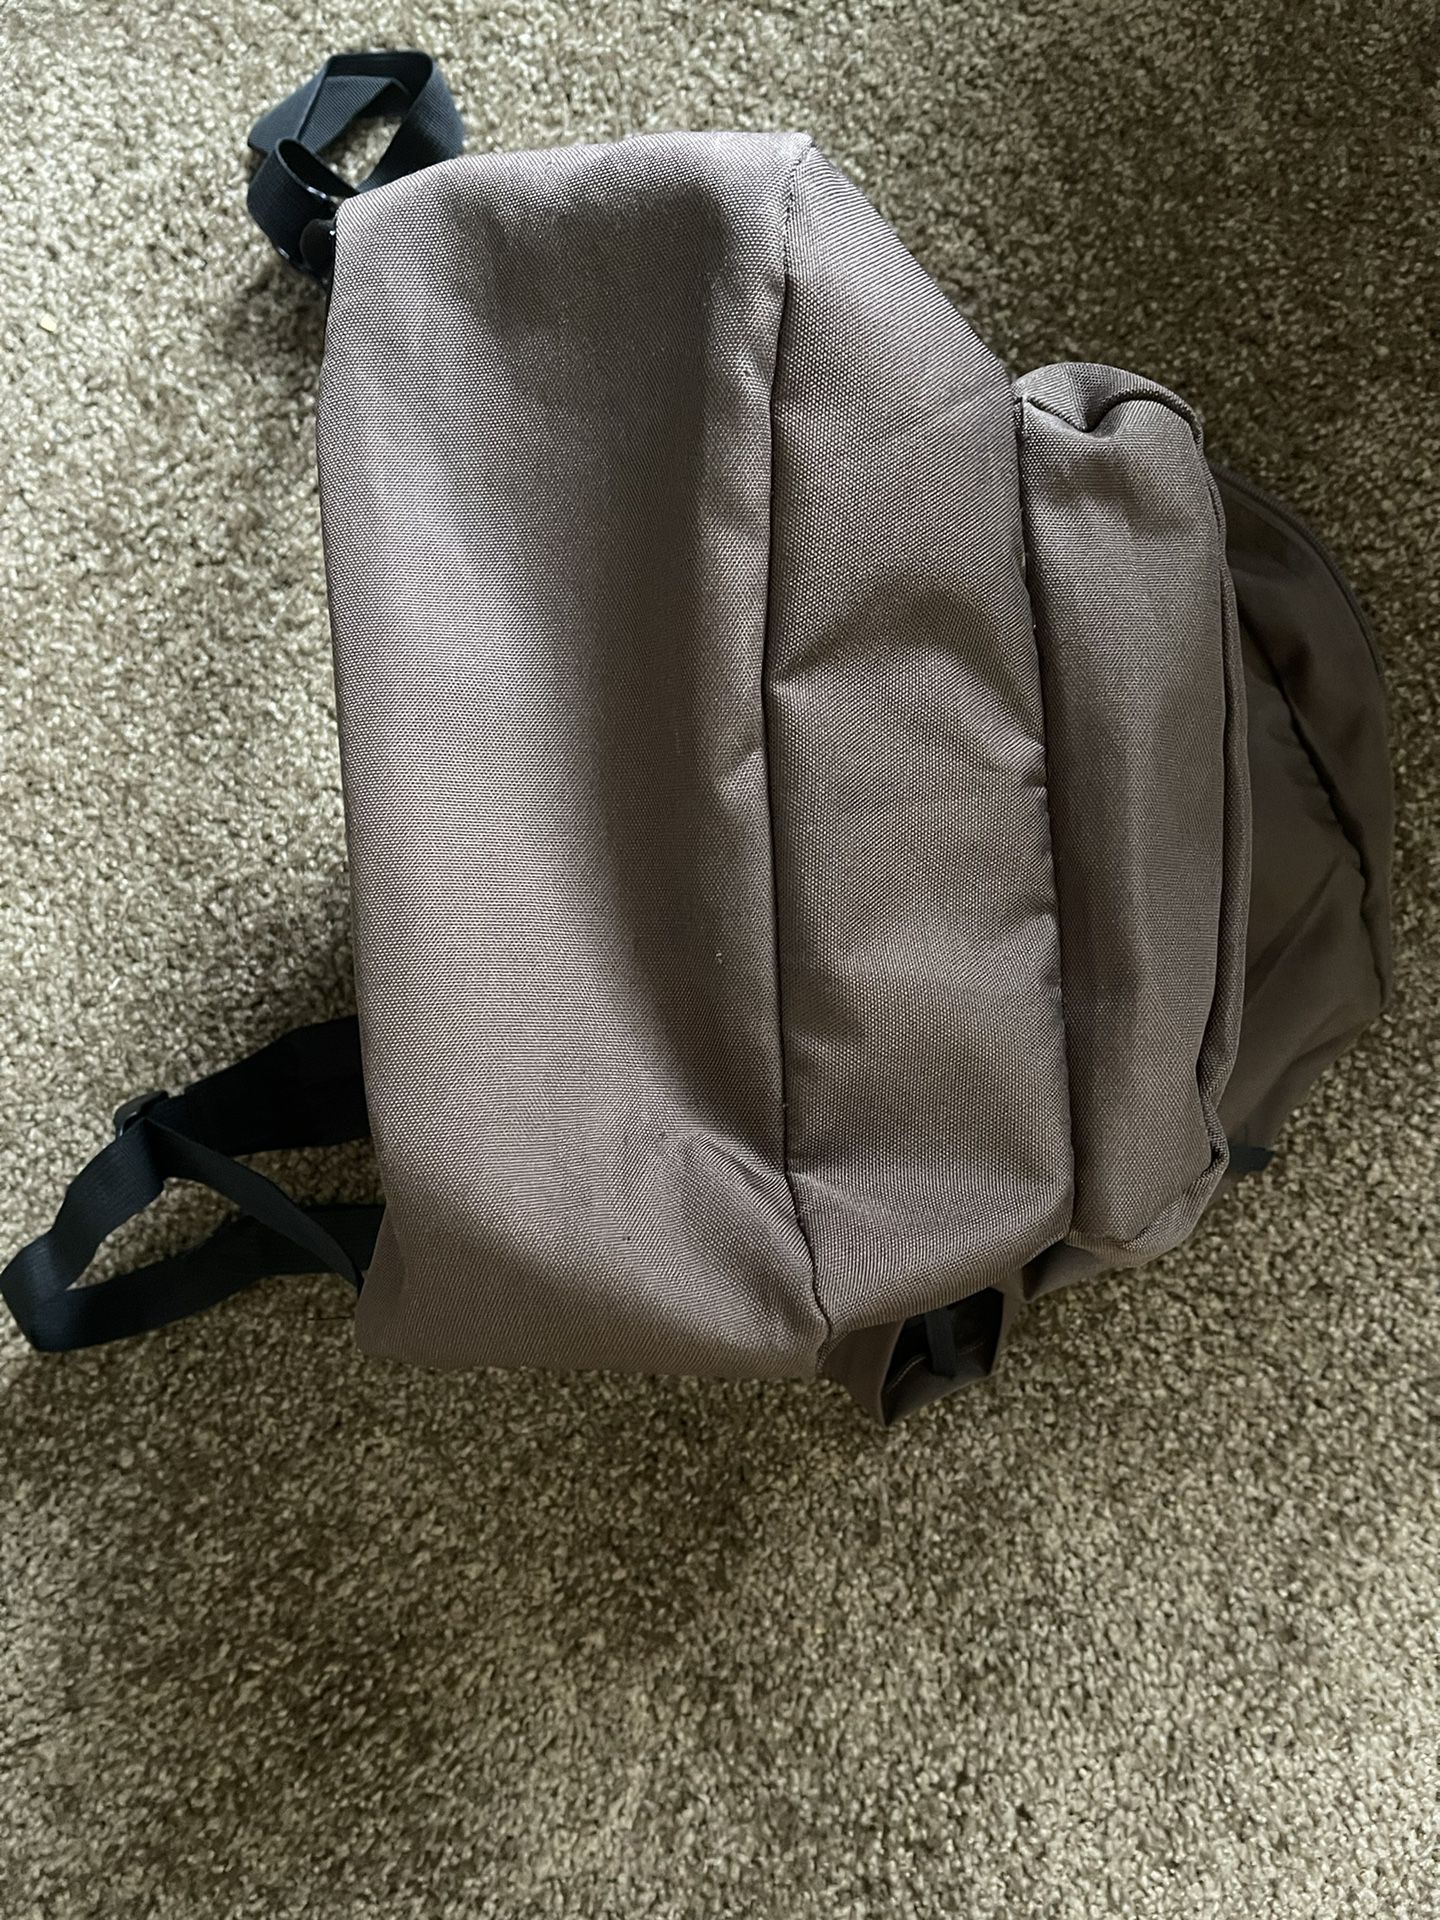 Travis Scott cactus jack Backpack With Patch Set for Sale in Anaheim, CA -  OfferUp